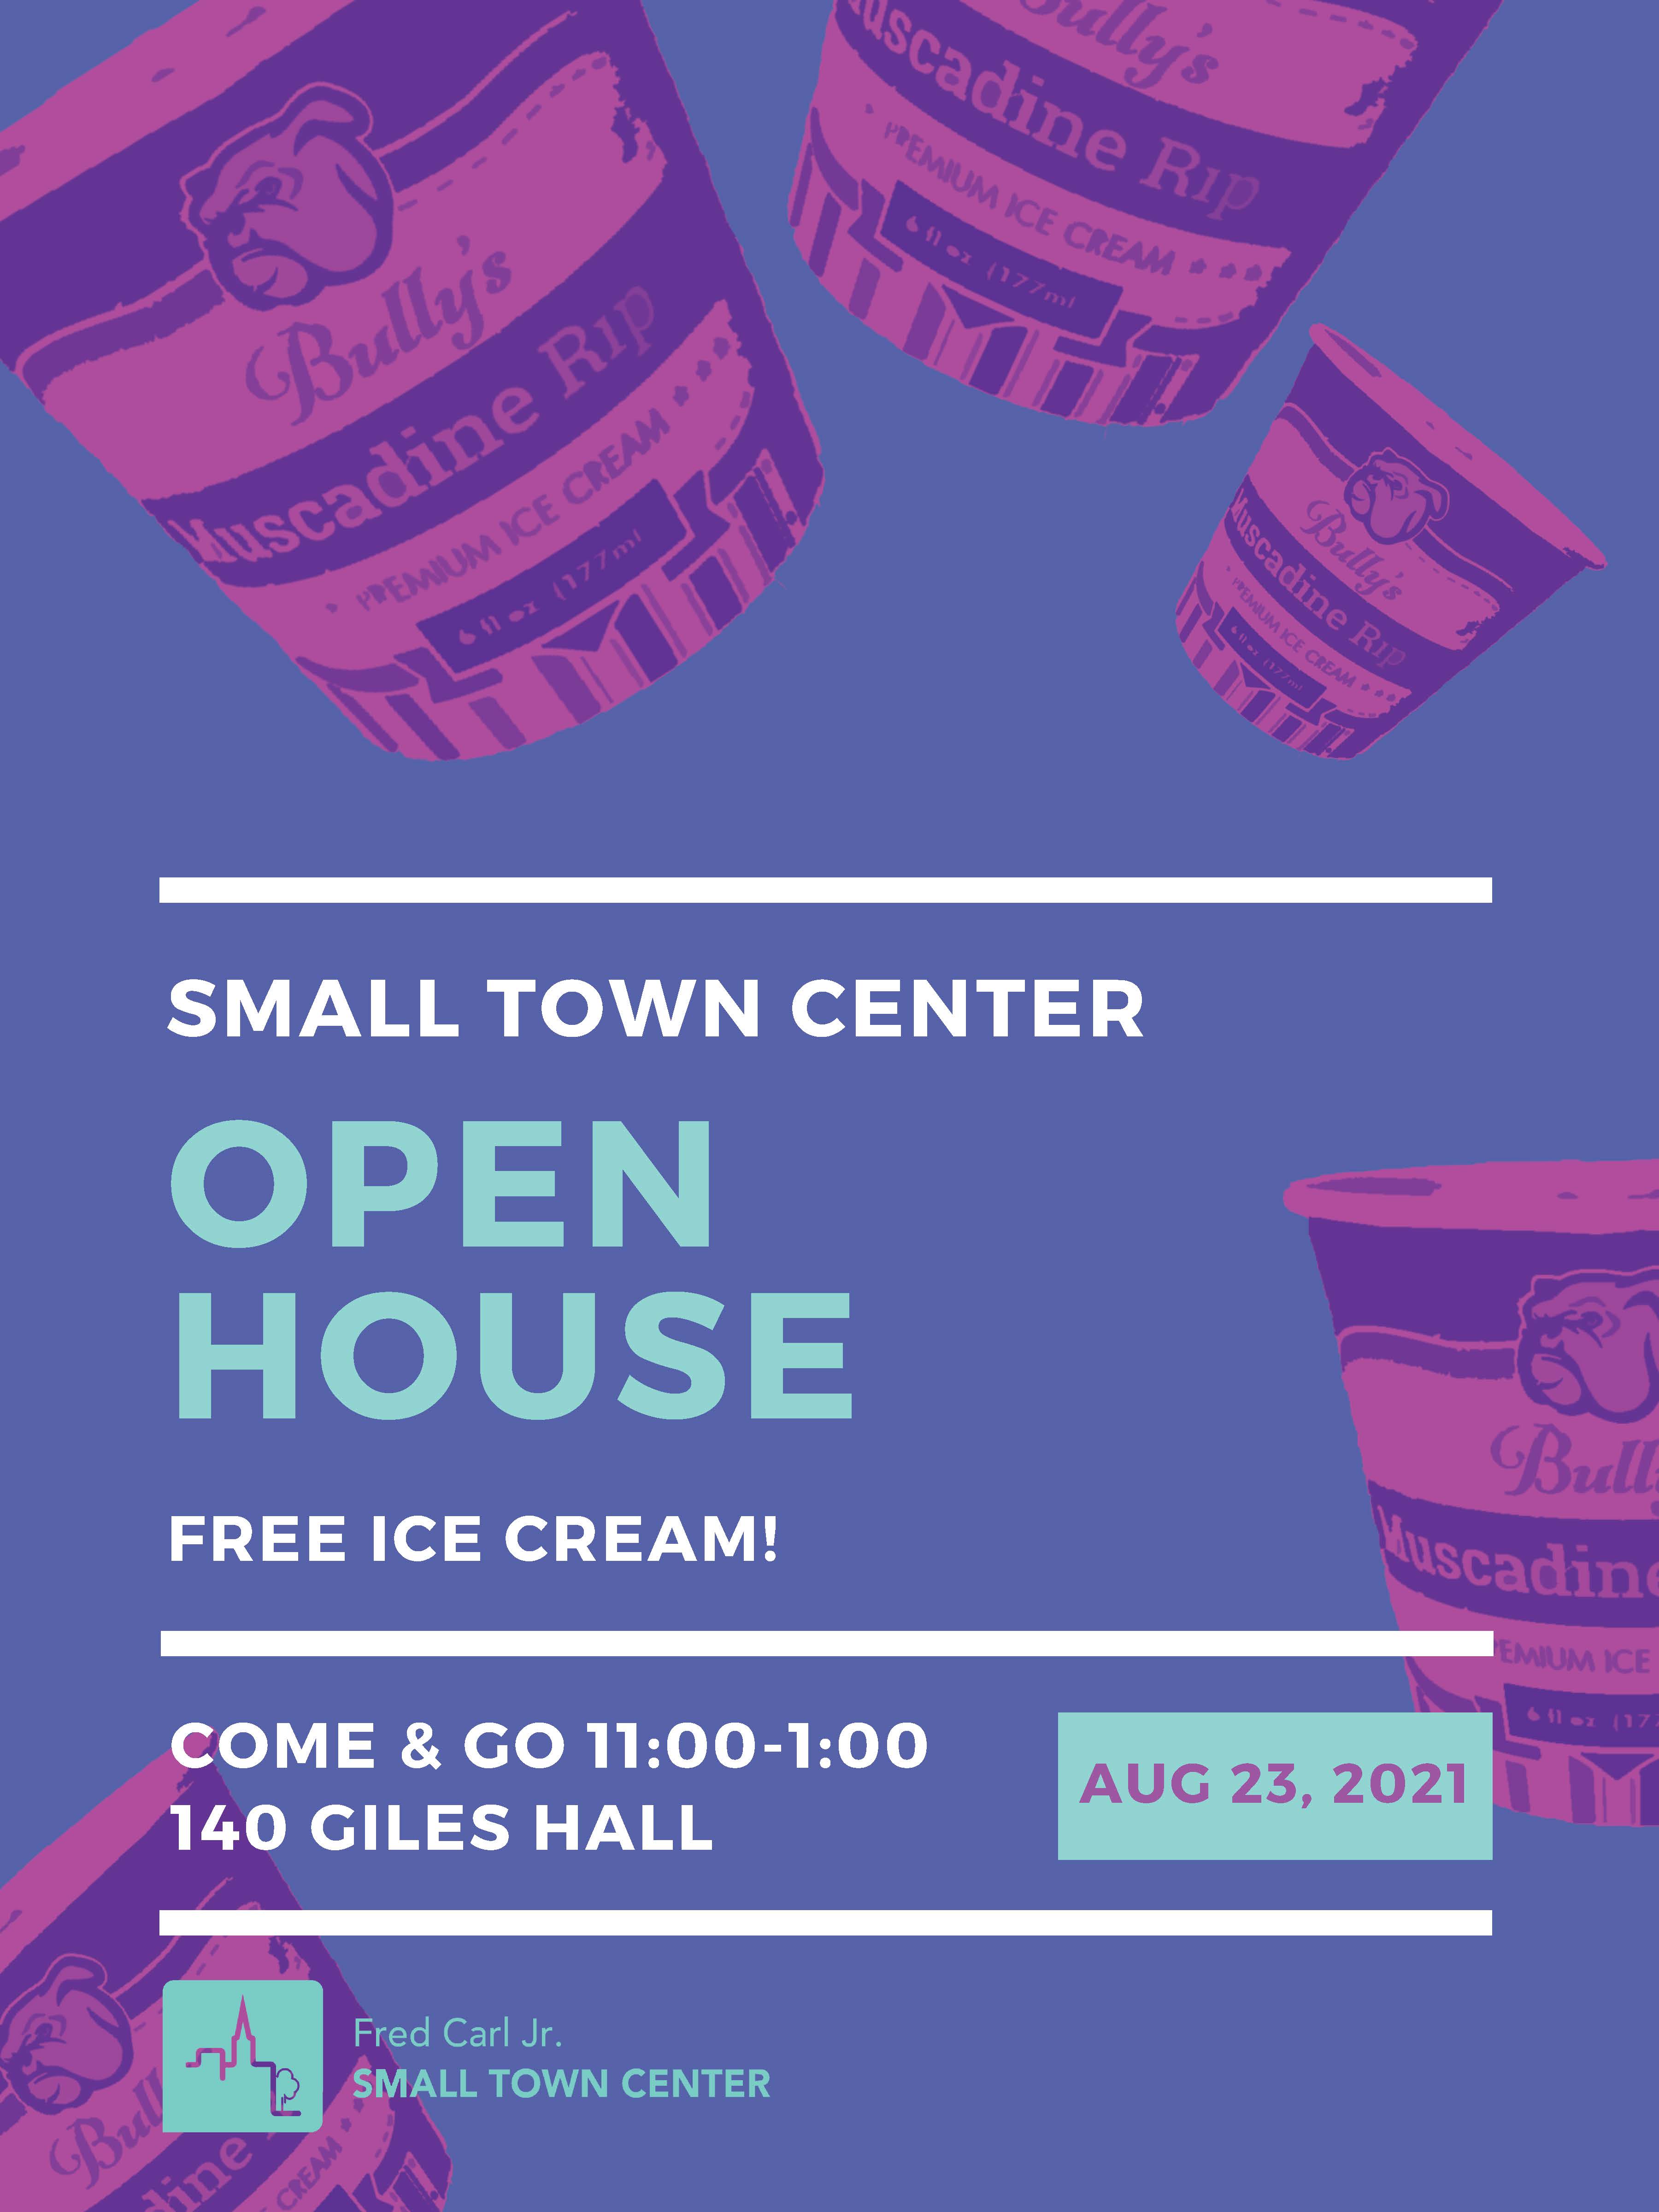 Colorful flyer, reads: Small Town Center Open House, Free Ice Cream! Come and go, 11-1, 140 Giles Hall, Aug. 23, Fred Carl Jr. Small Town Center logo